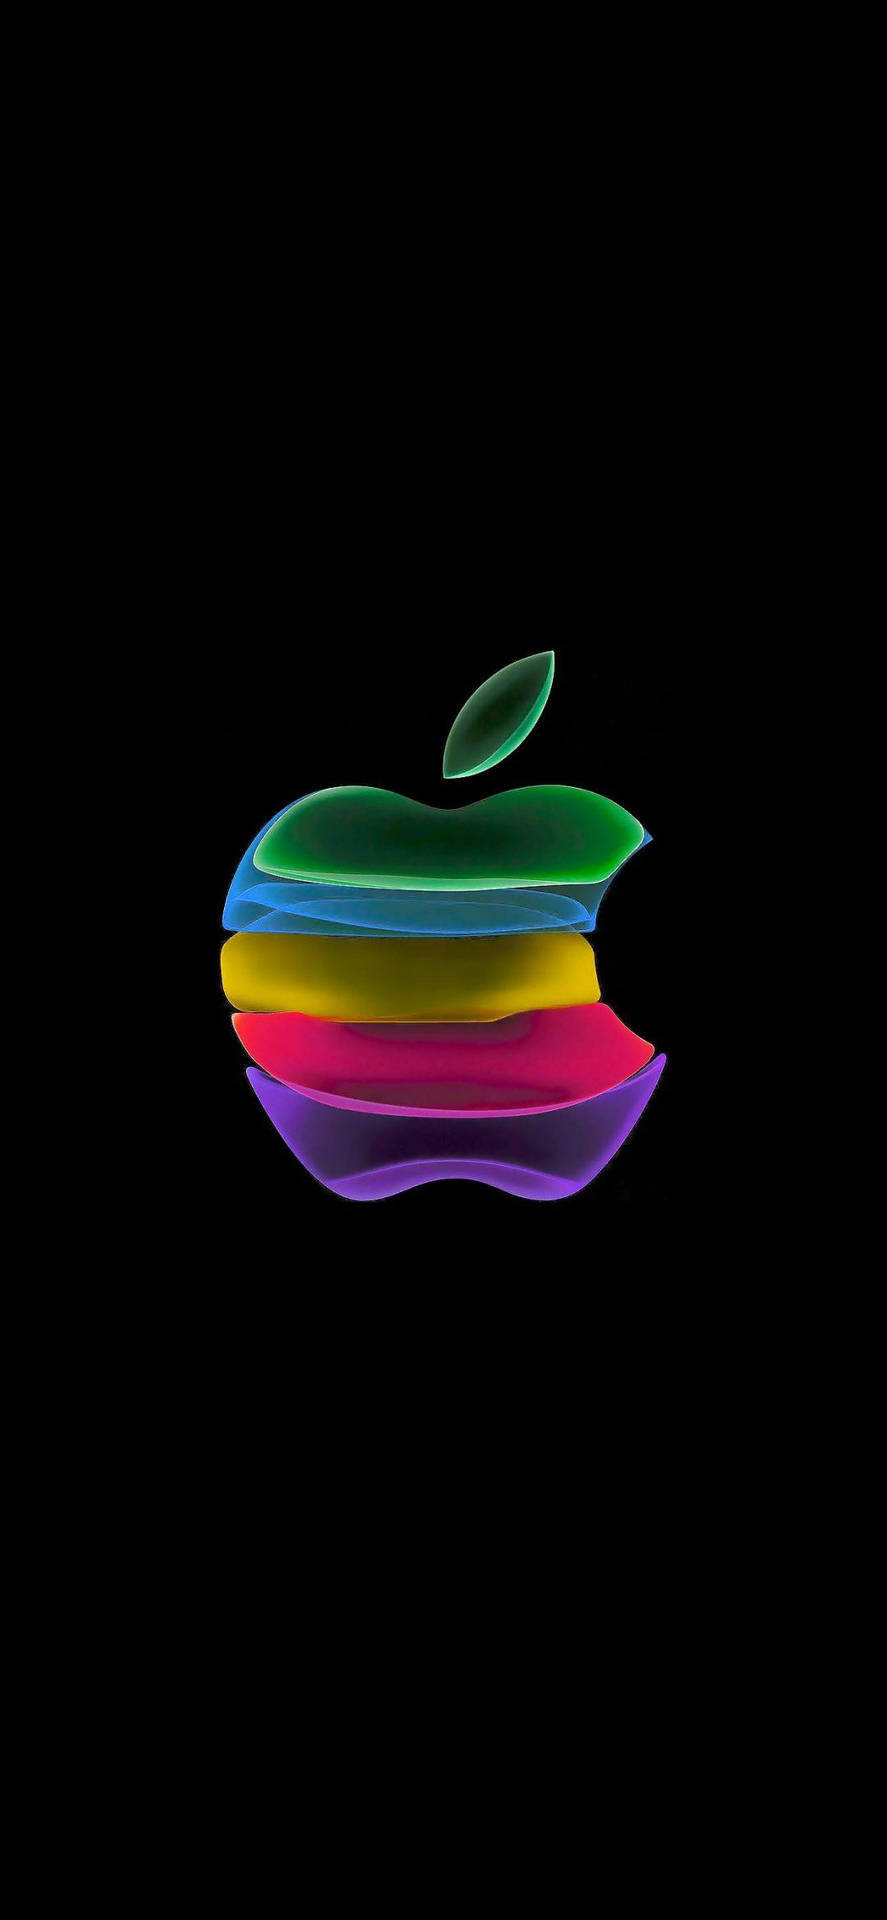 Colorful 3d Apple Iphone Logo Background